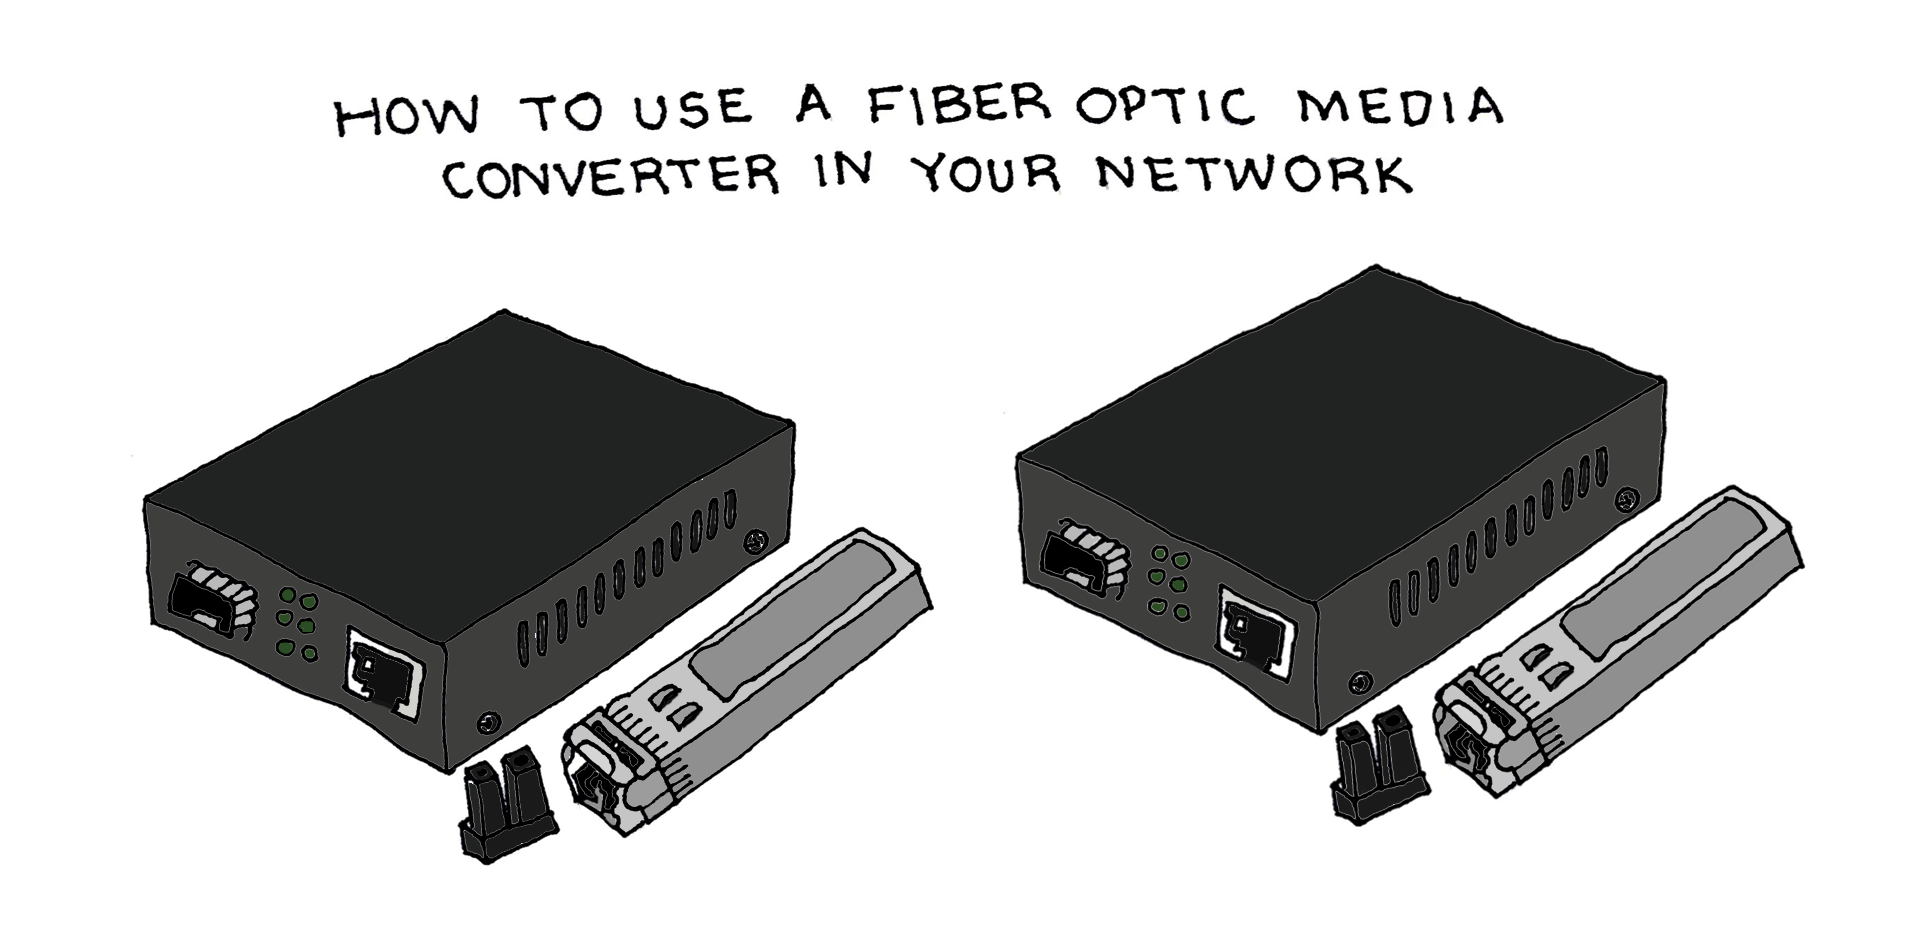 How To Use A Fiber Optic Media Converter In Your Network